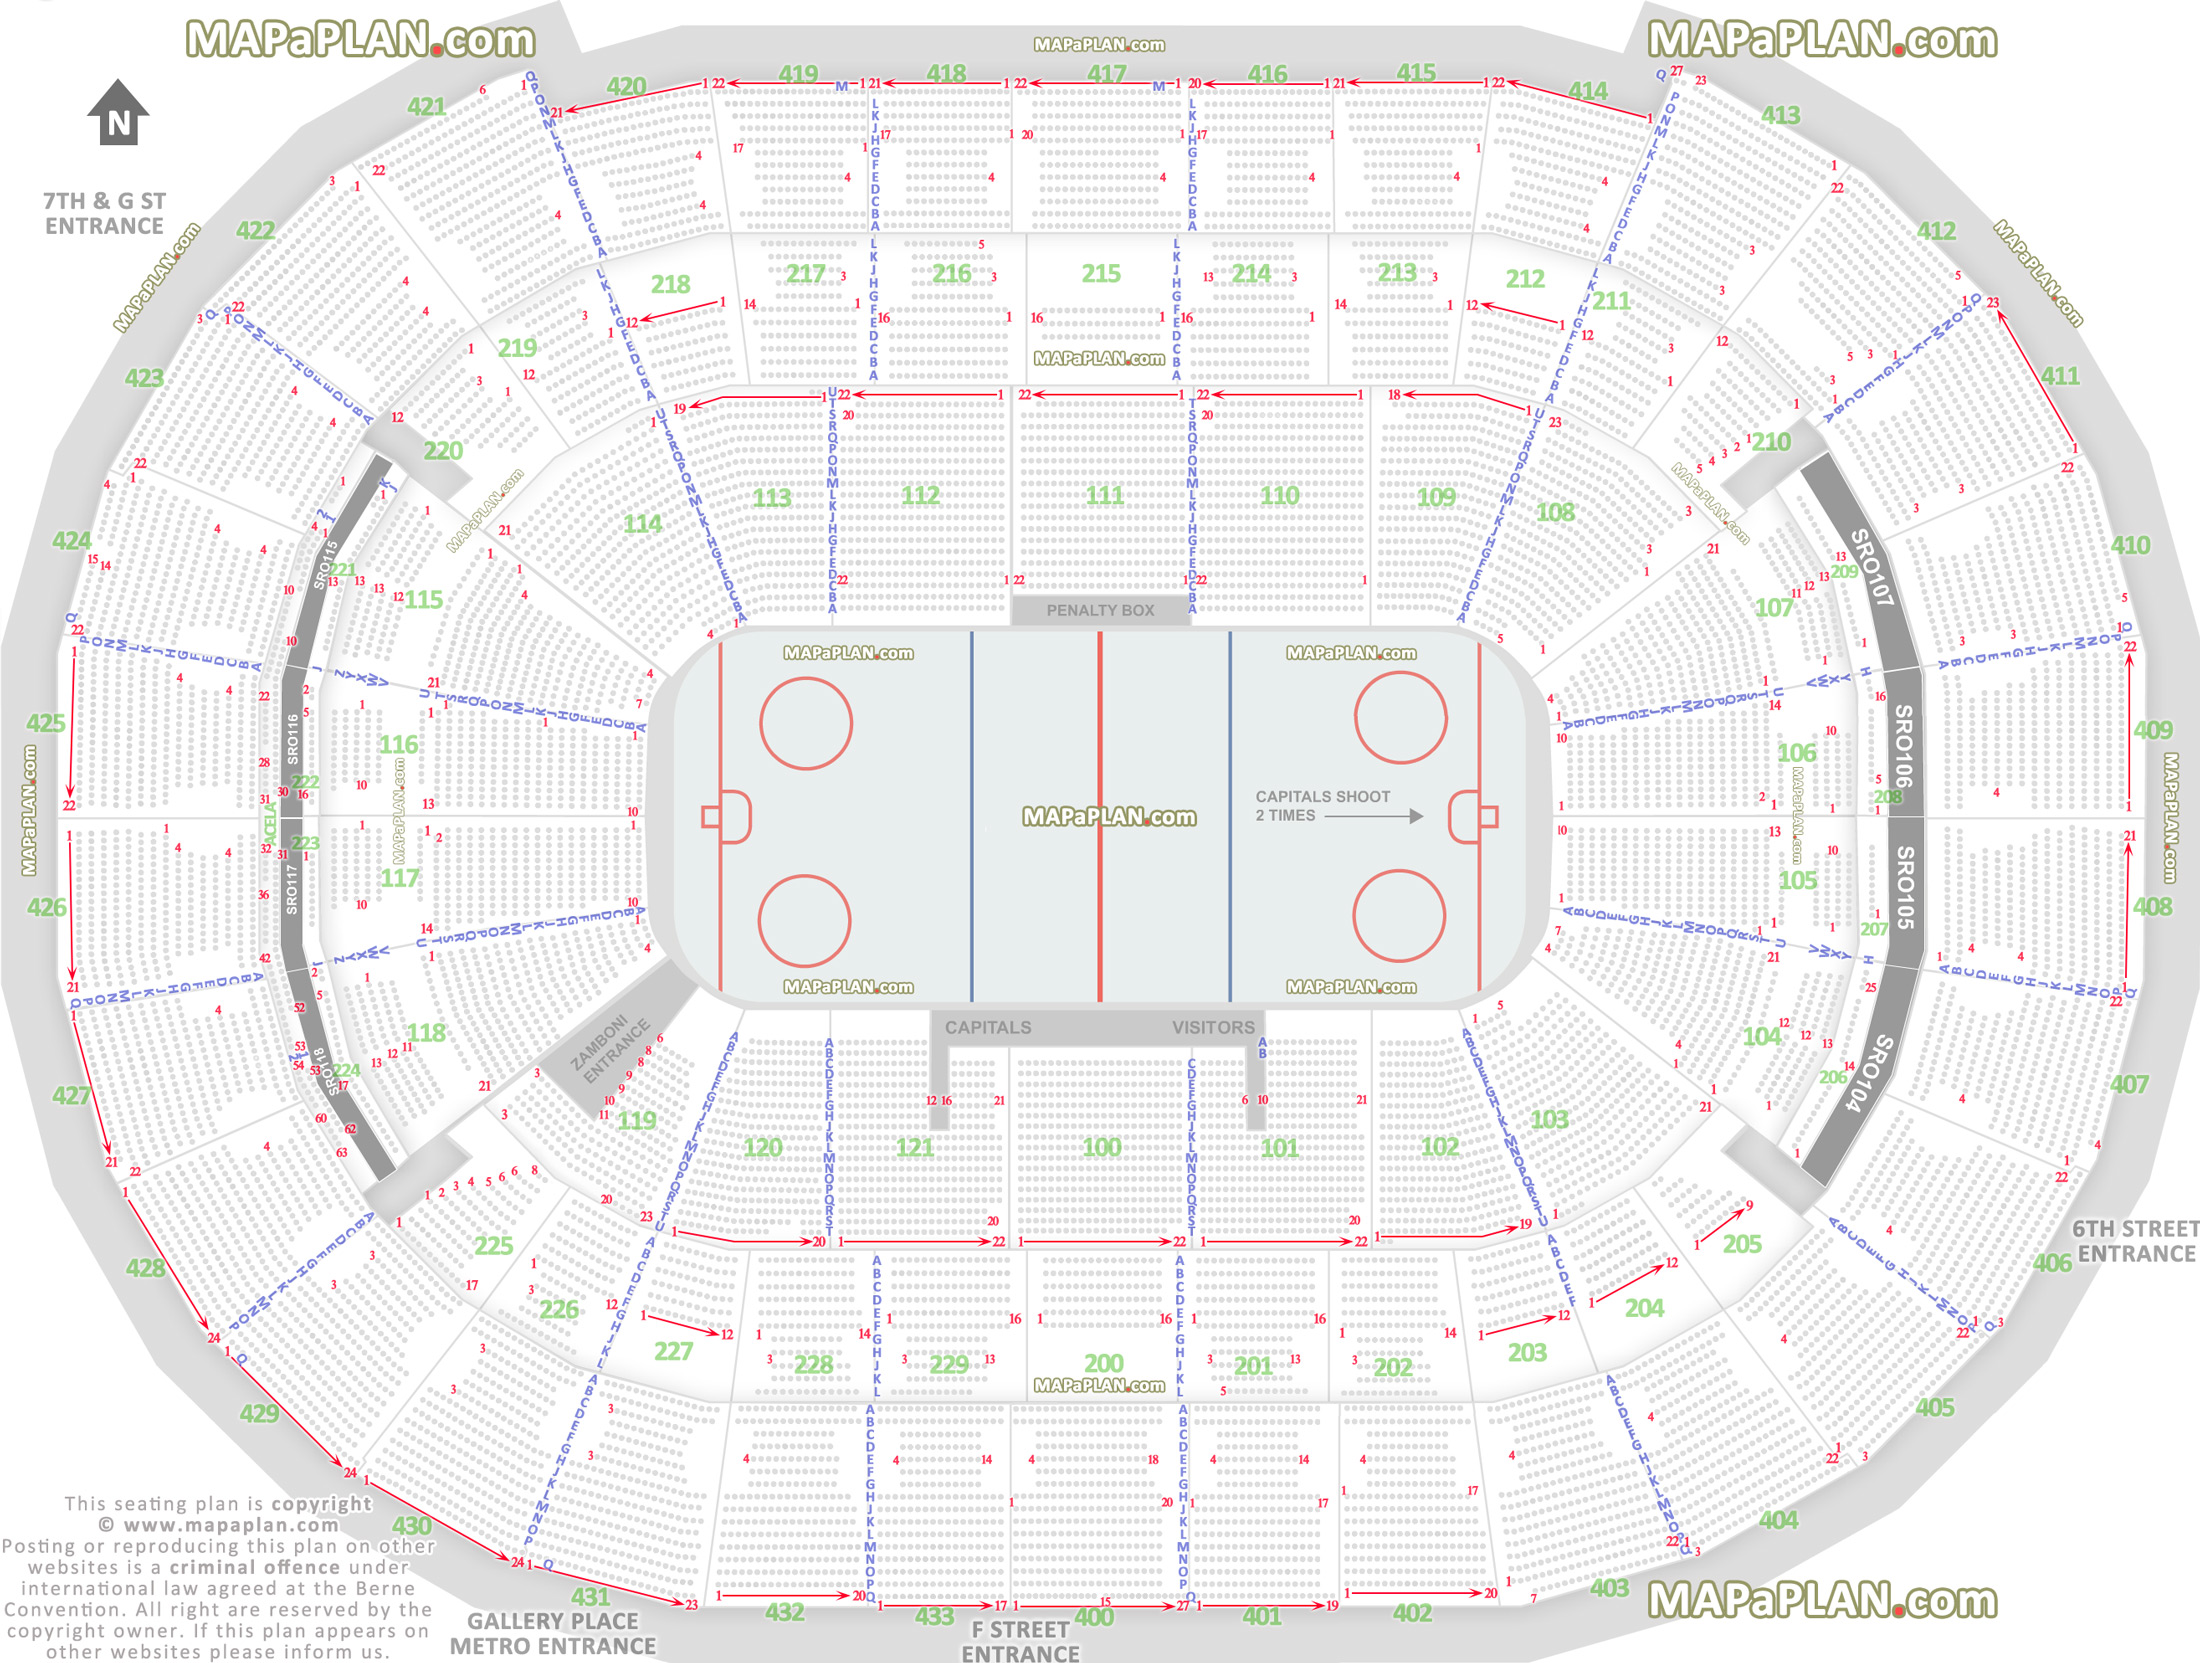 Verizon Center Seating Chart With Seat Numbers